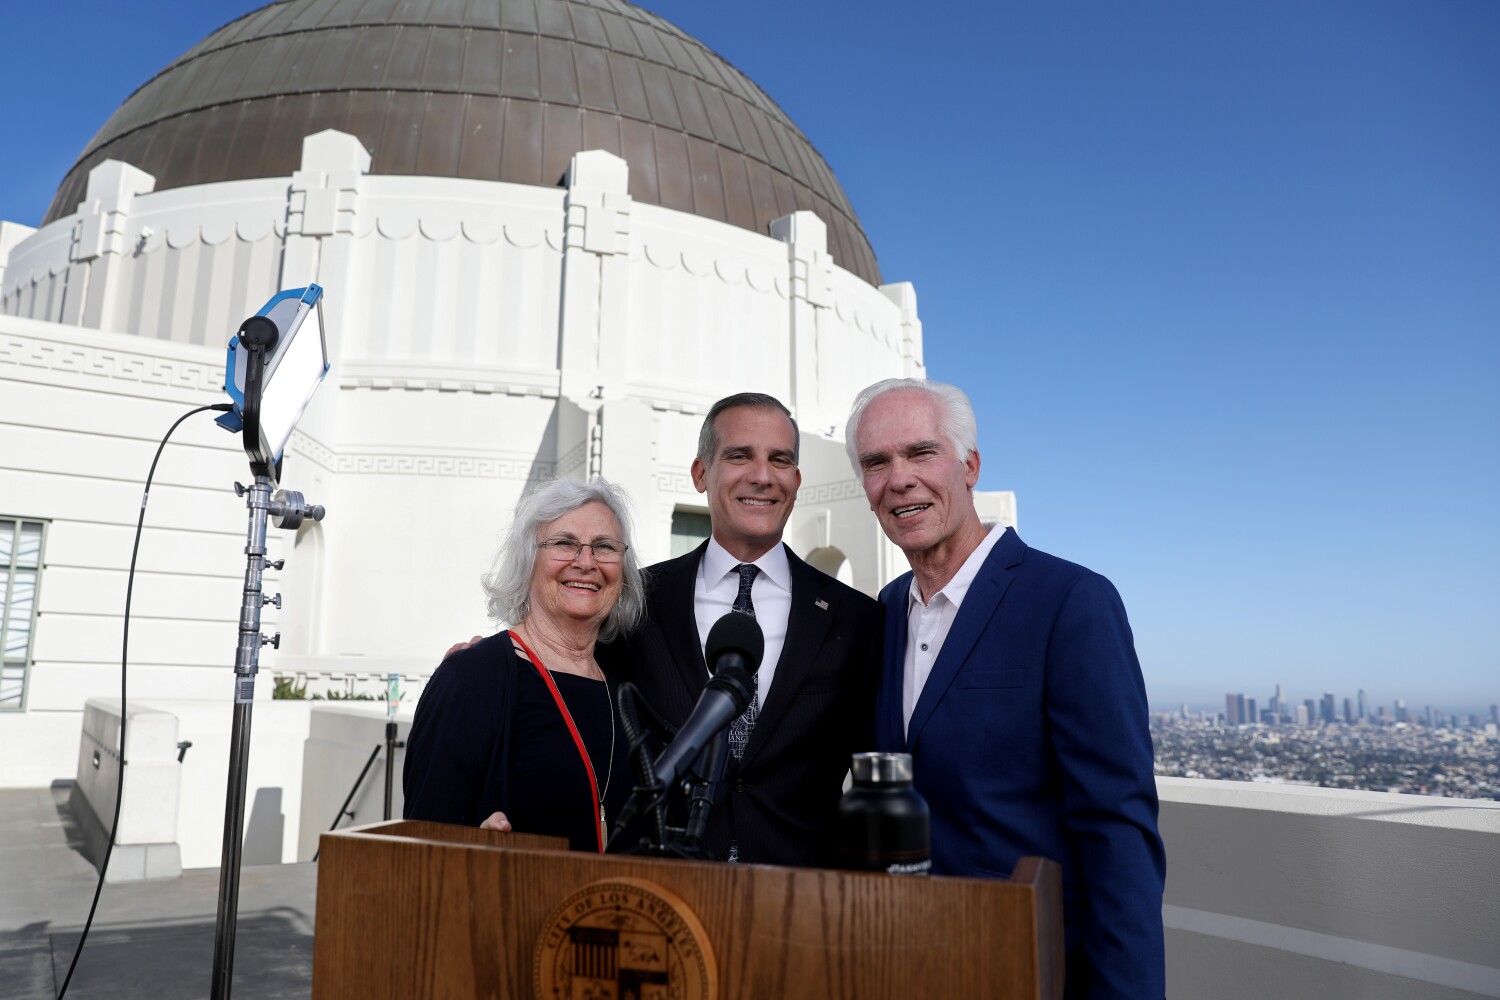 Garcetti's parents hire lobbyists to help him in D.C.